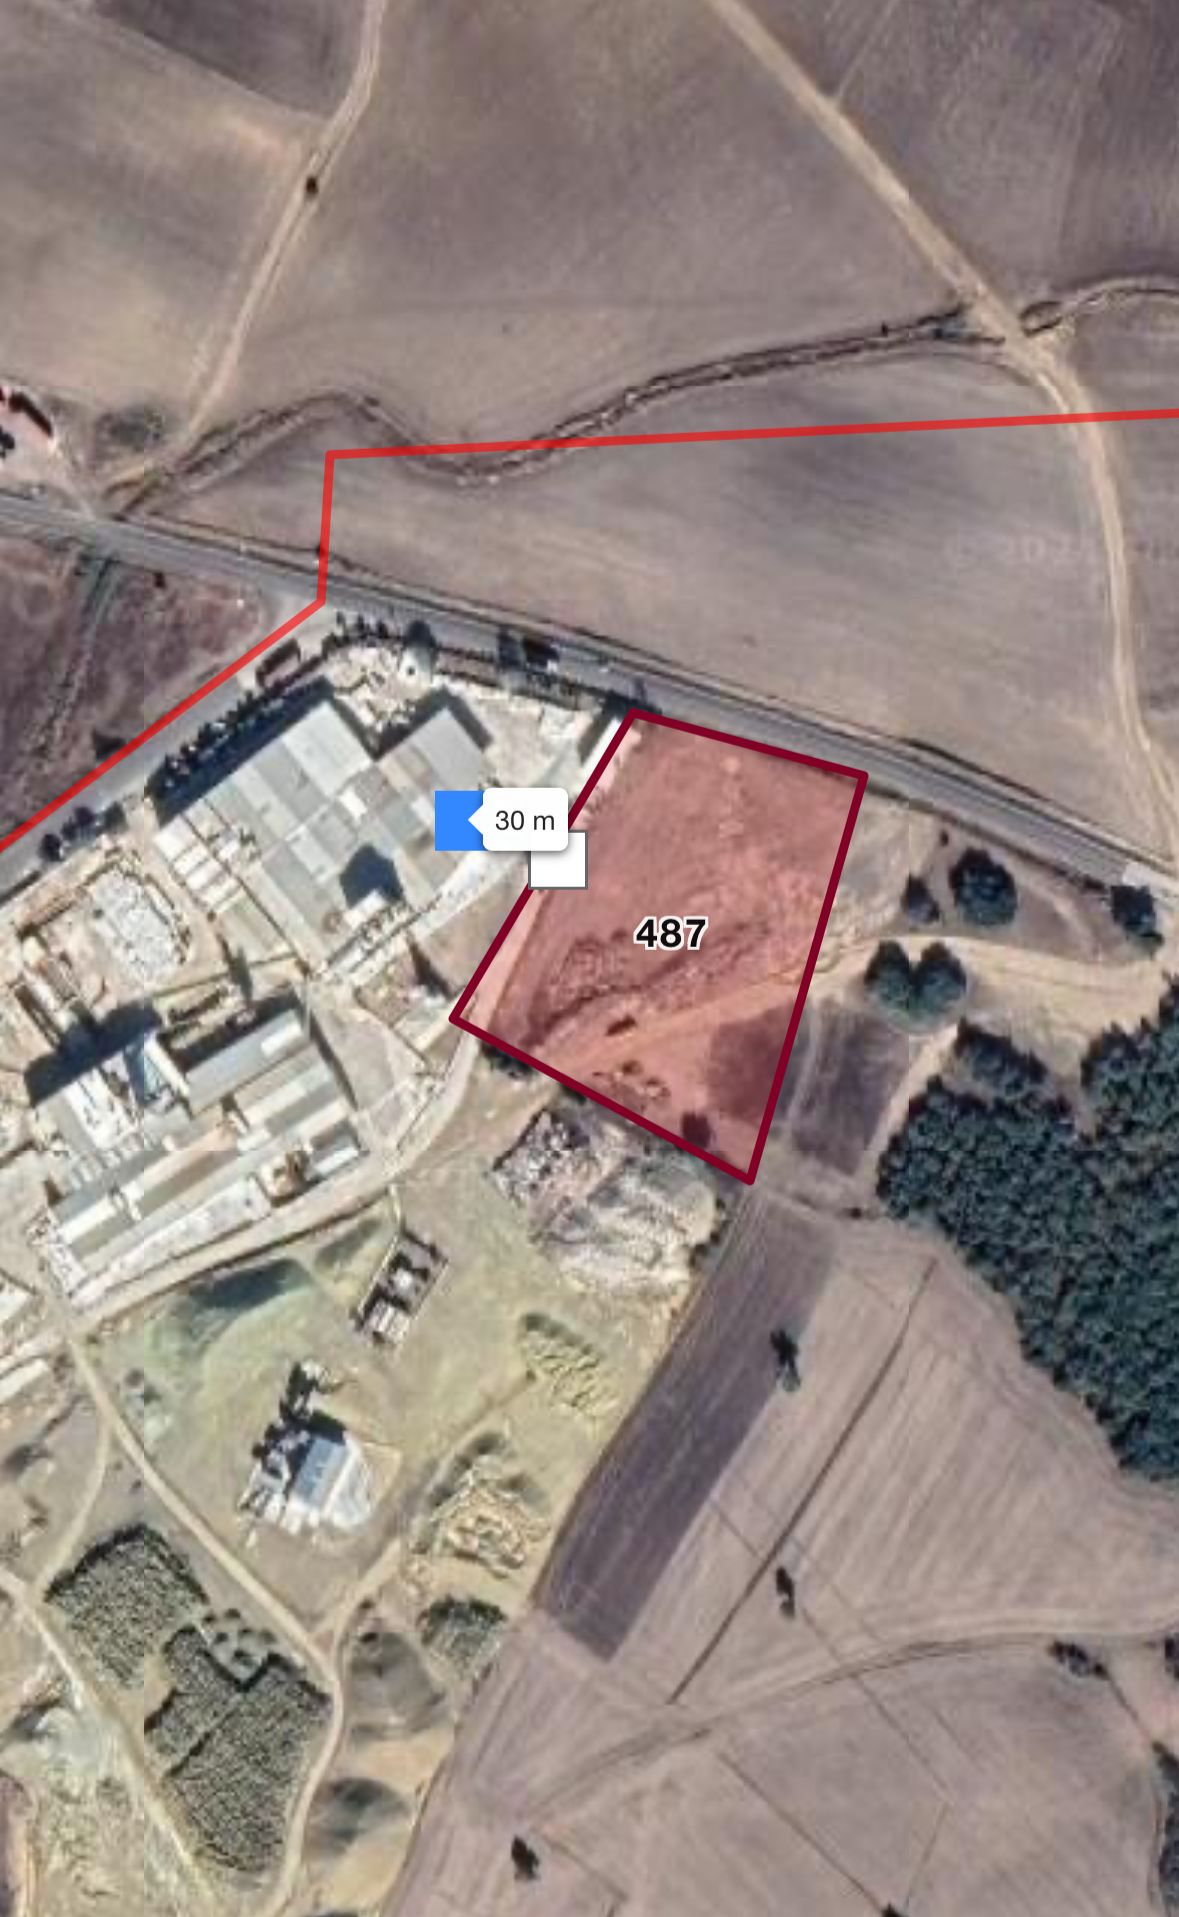 Property located next to a factory / Directly from the owner